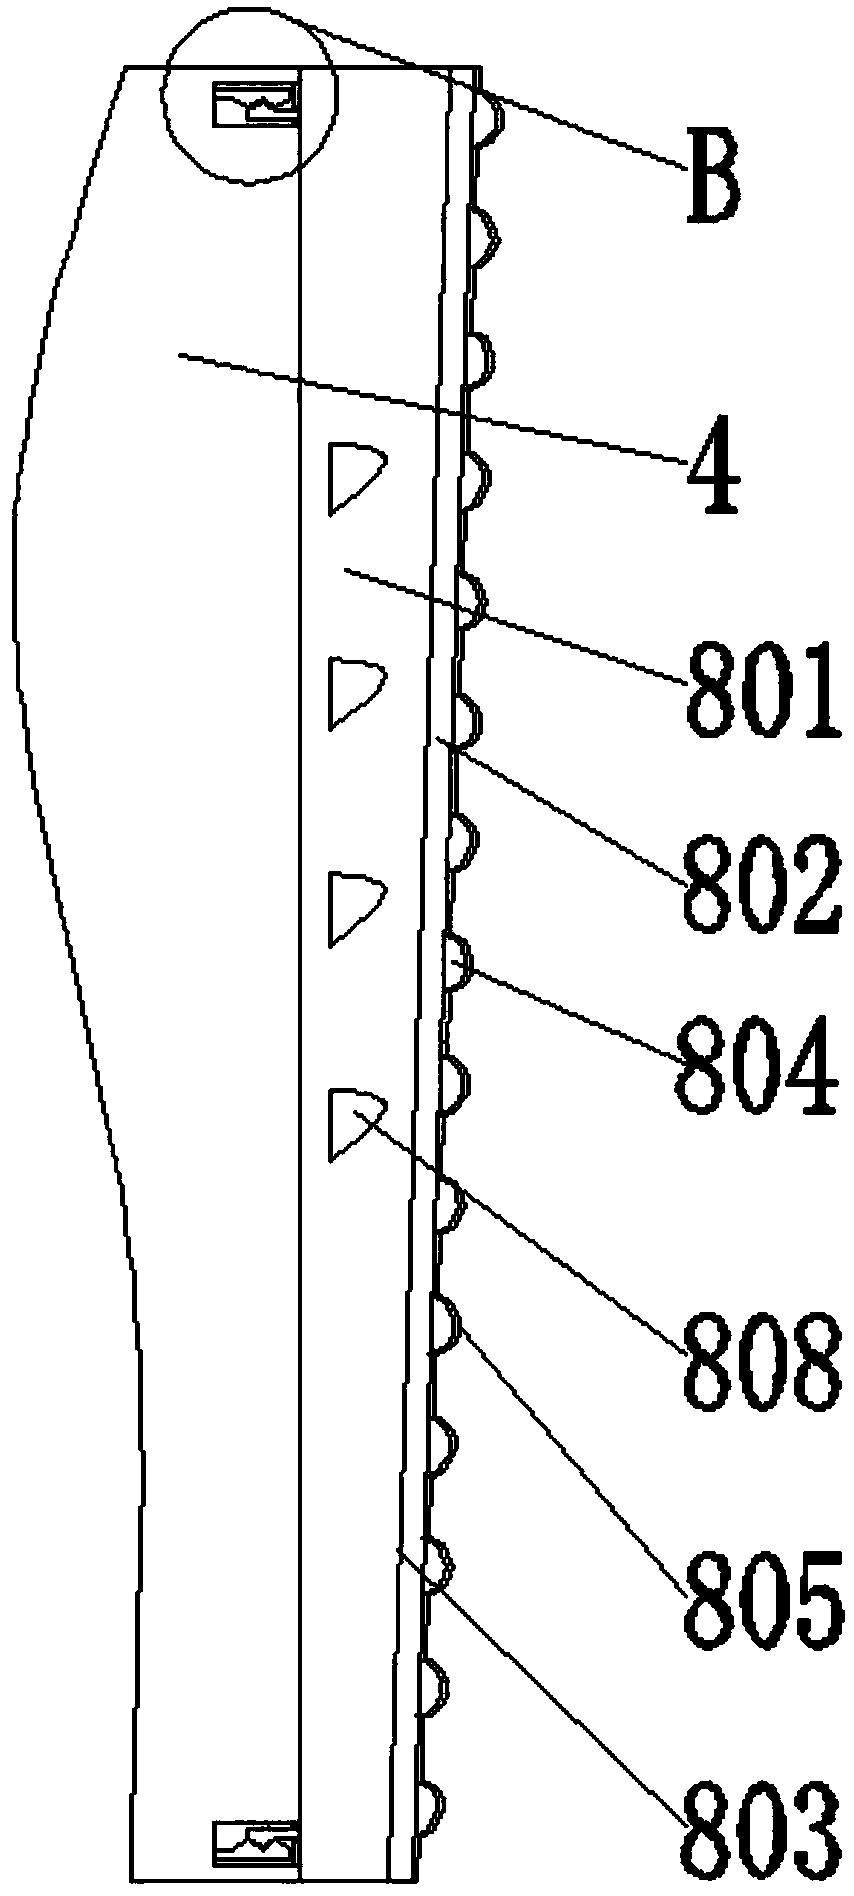 Facing board with light emitting function and applied to wall enclosure